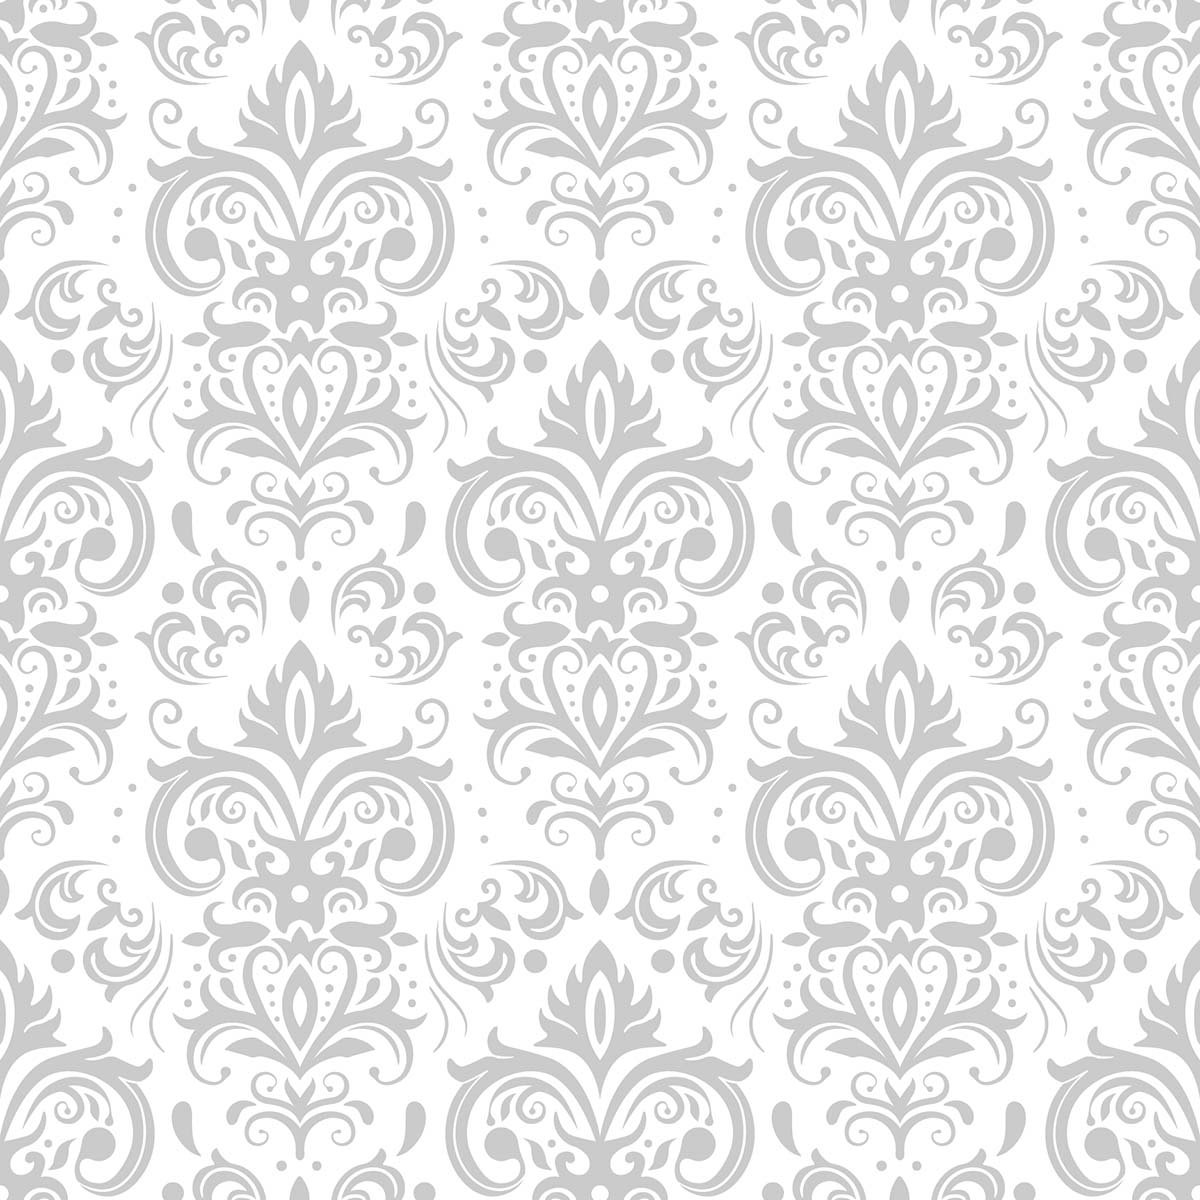 A white and grey wallpaper